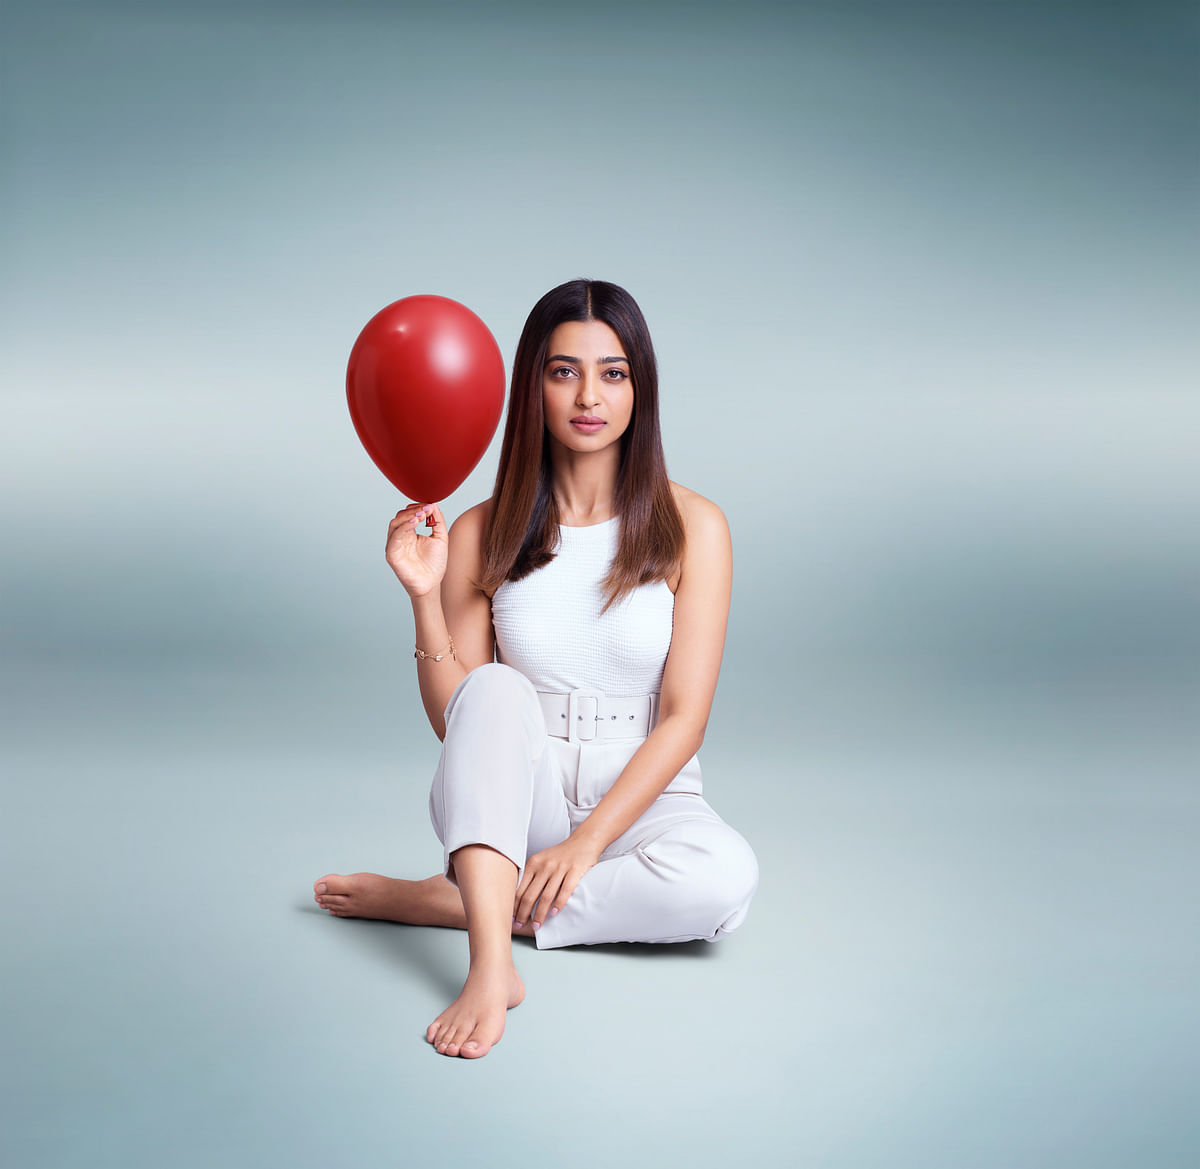 A sanitary napkin ad that doesn't show 'blue' blood